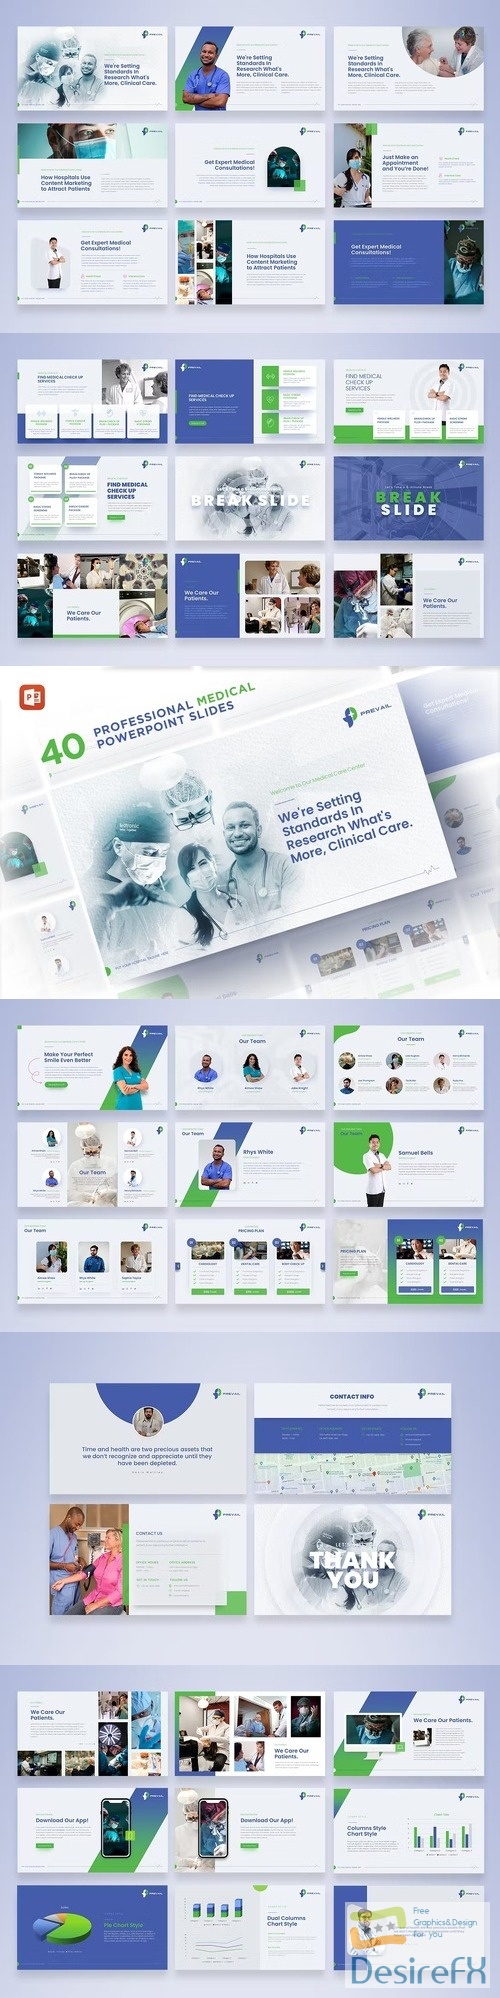 Prevail - Medical Powerpoint Template